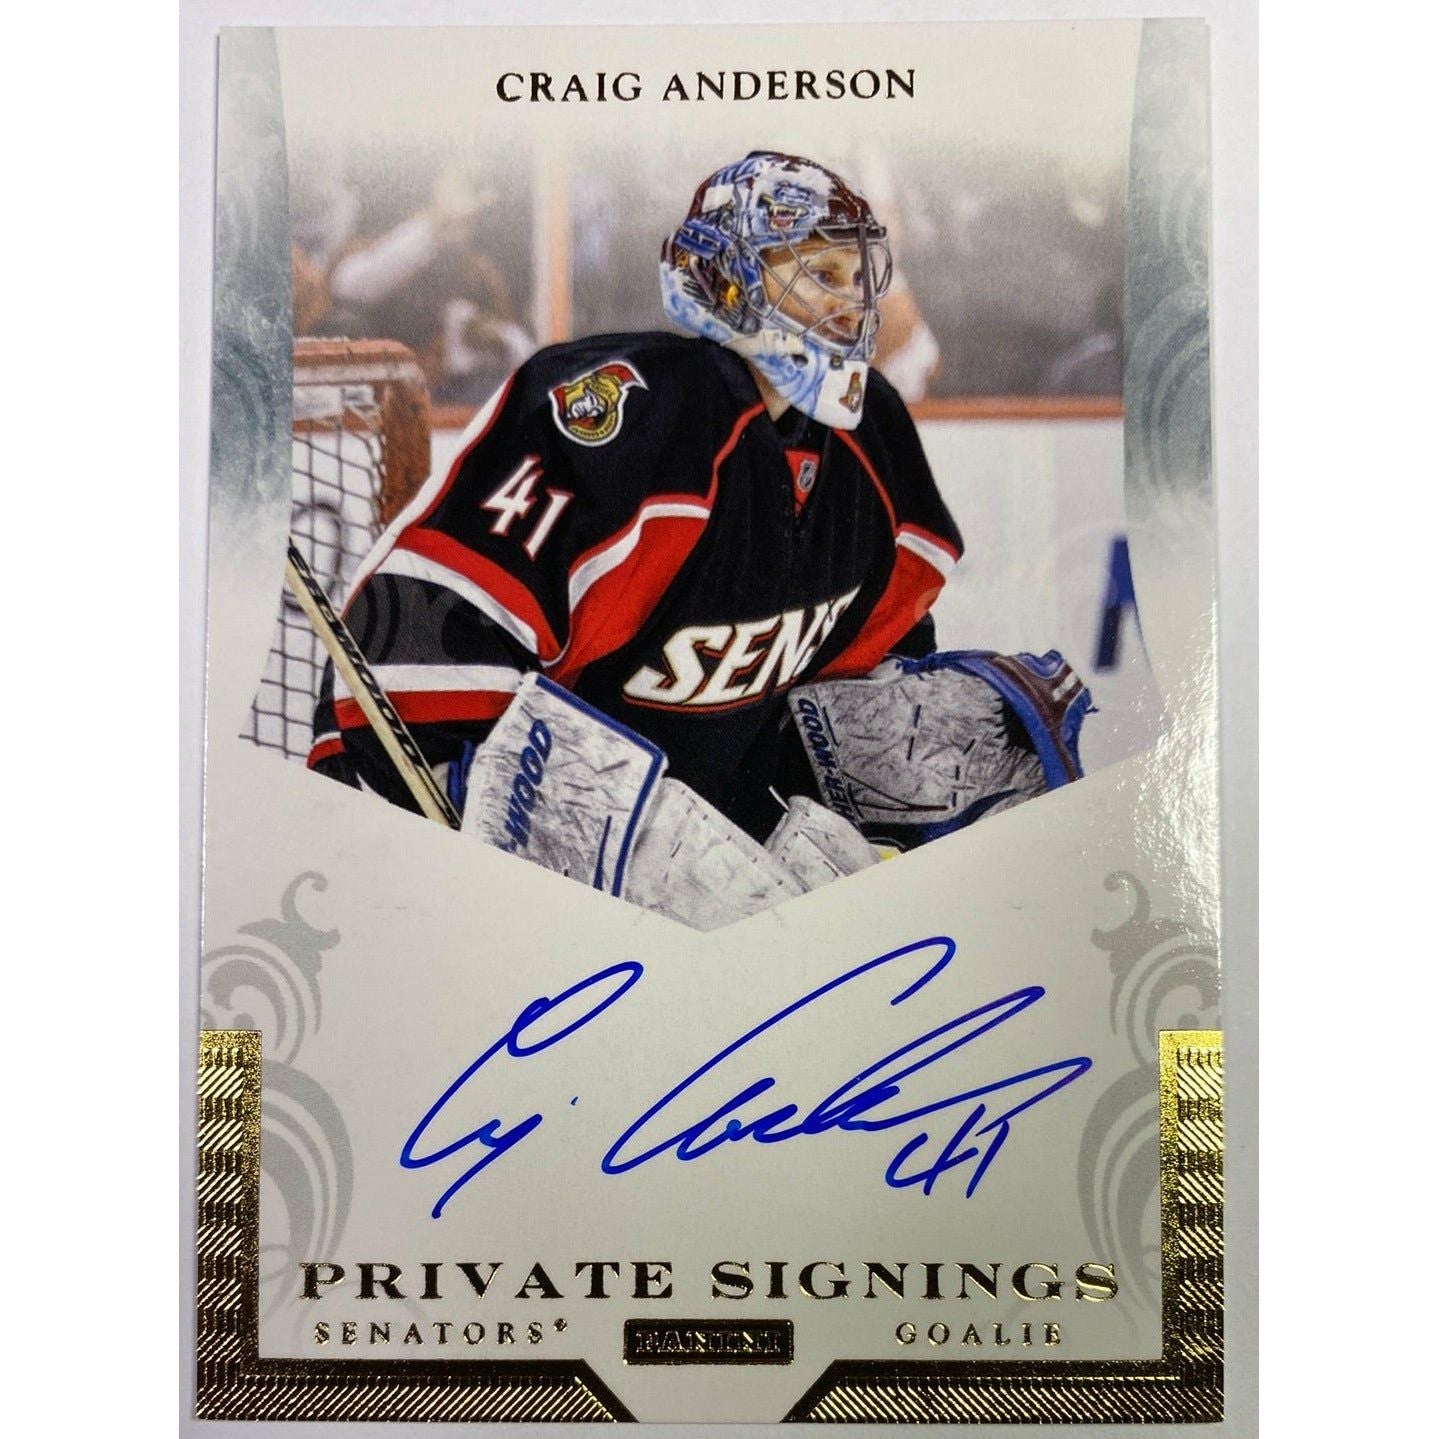  2011-12 Panini Craig Anderson Private Signings  Local Legends Cards & Collectibles